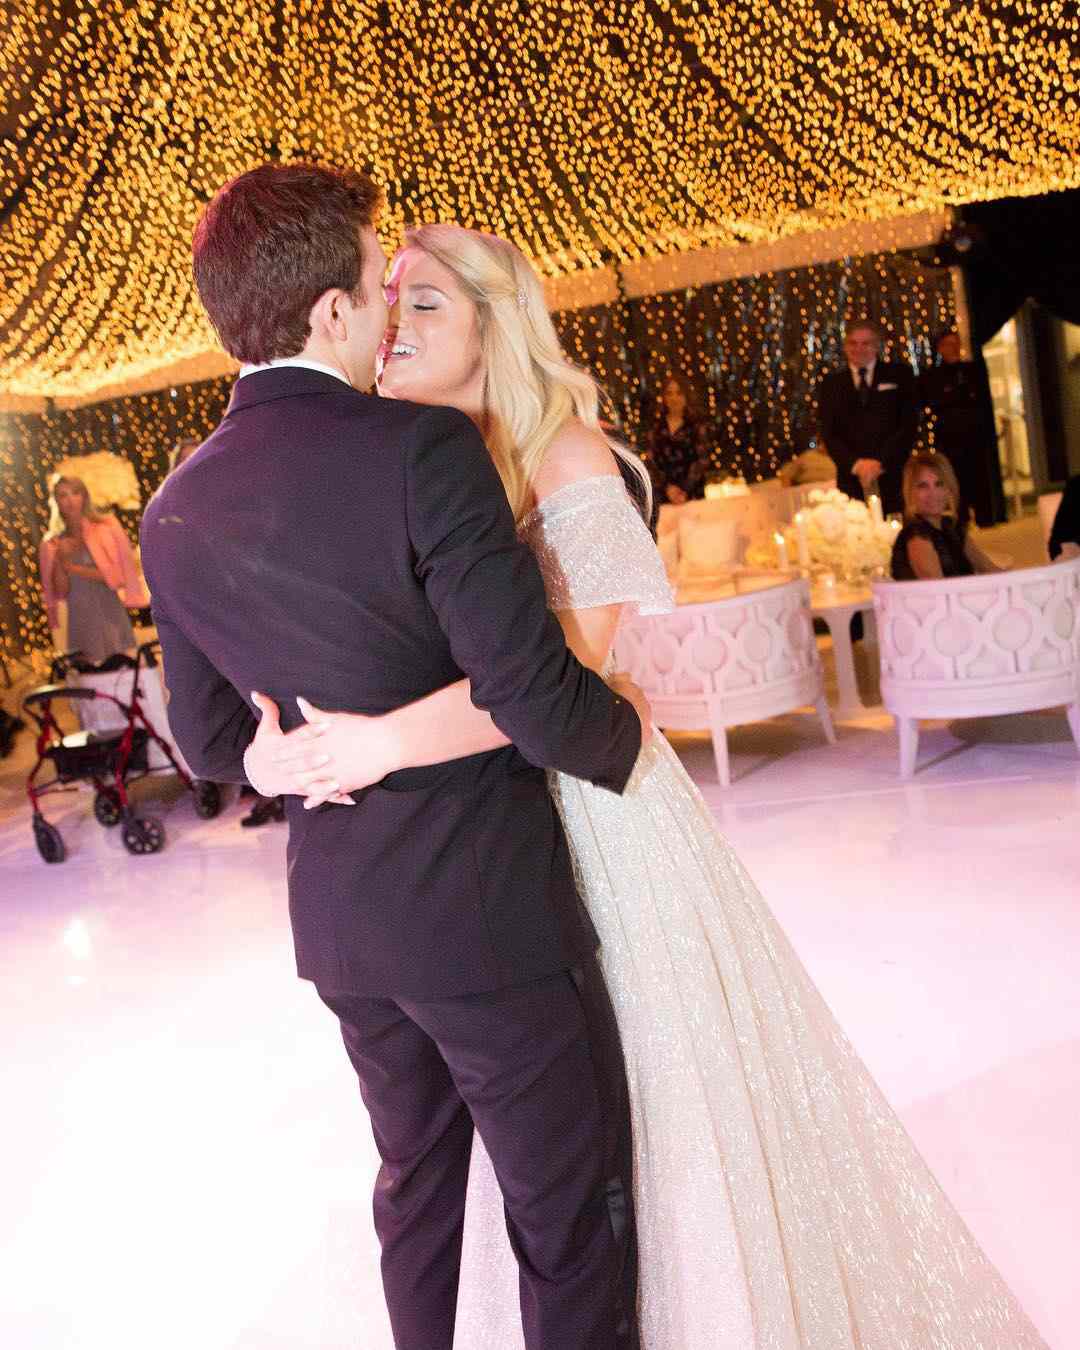 Meghan Trainor Reveals the Most Expensive Part of Her Wedding to Husband Daryl Sabara